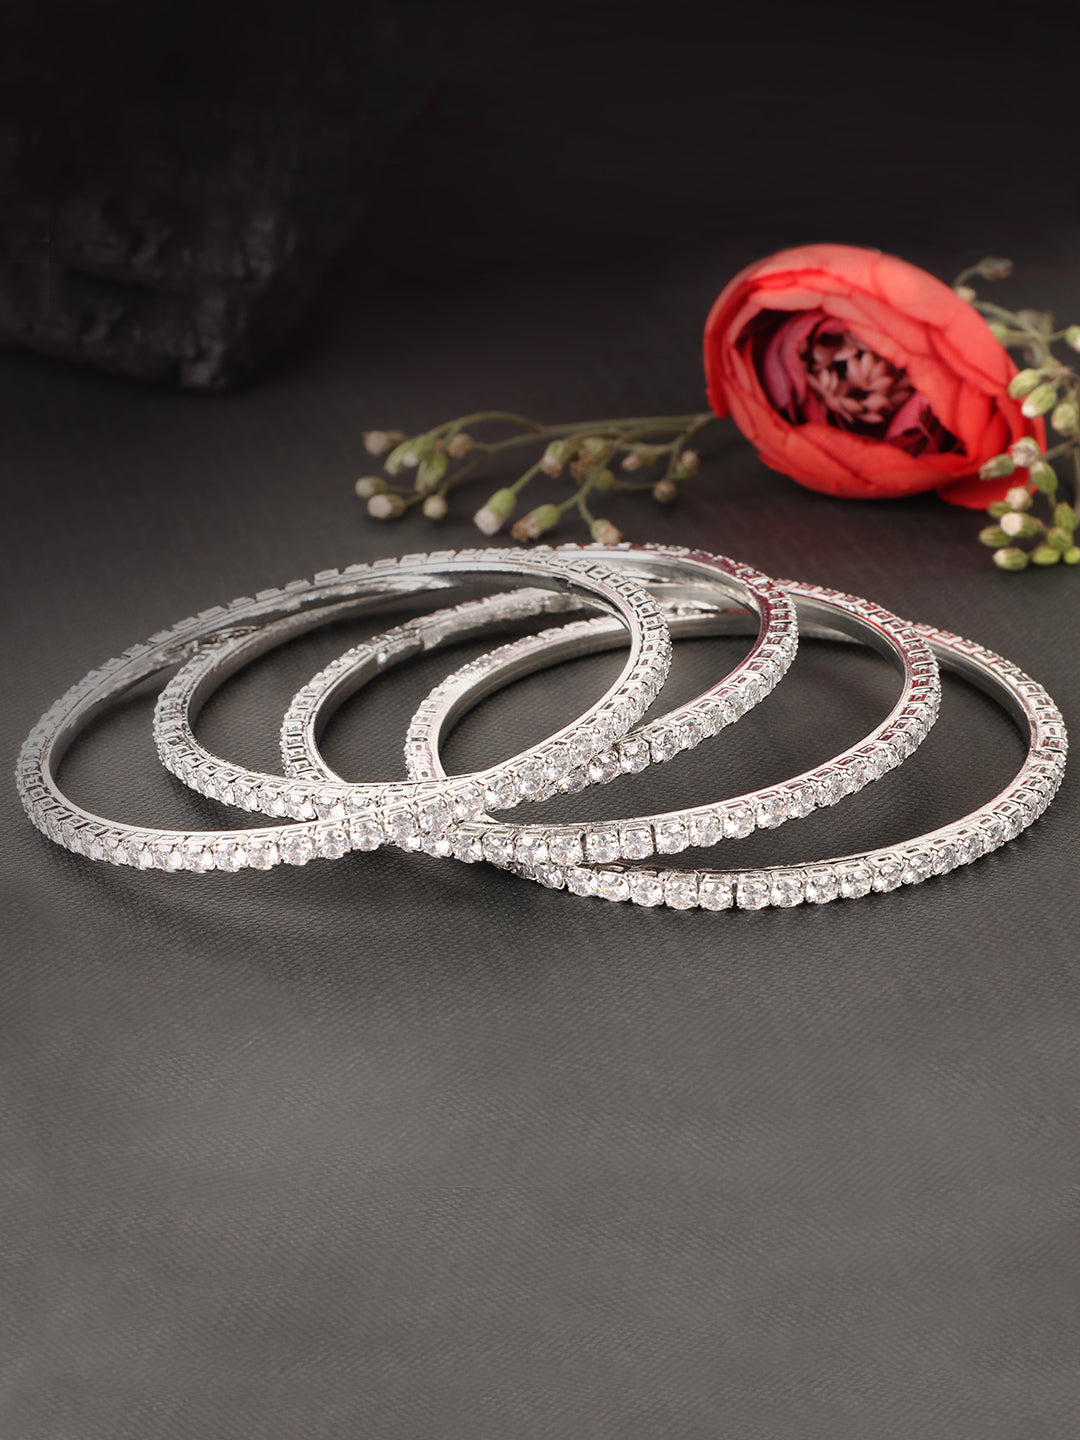 Set of 4 White Silver-Plated American Diamond Studded Bangles